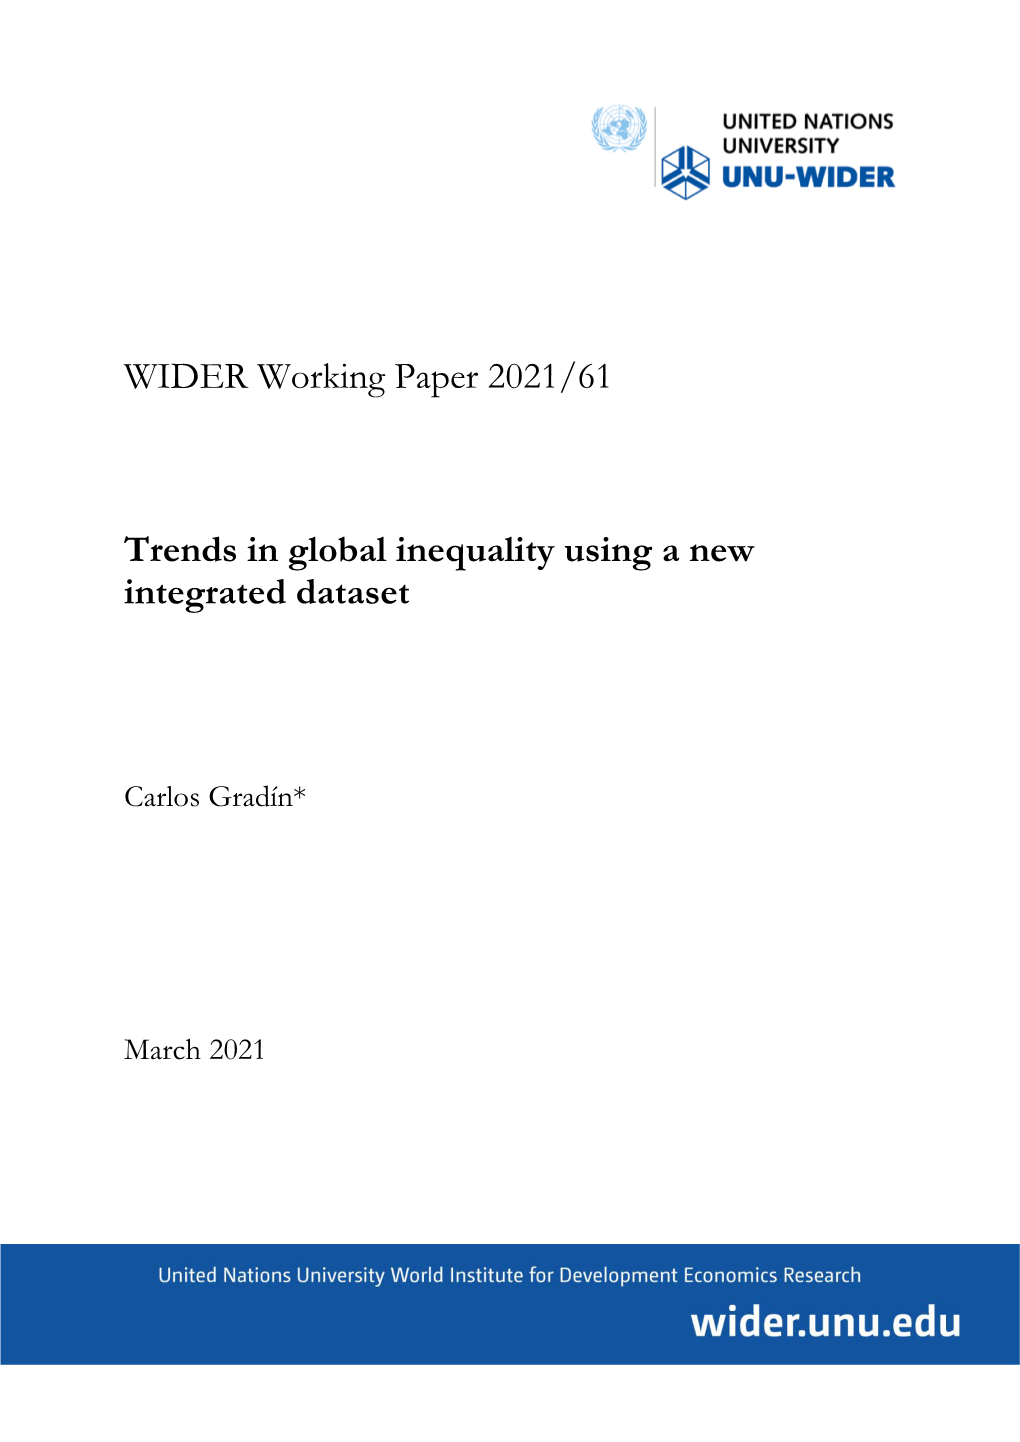 WIDER Working Paper 2021/61-Trends in Global Inequality